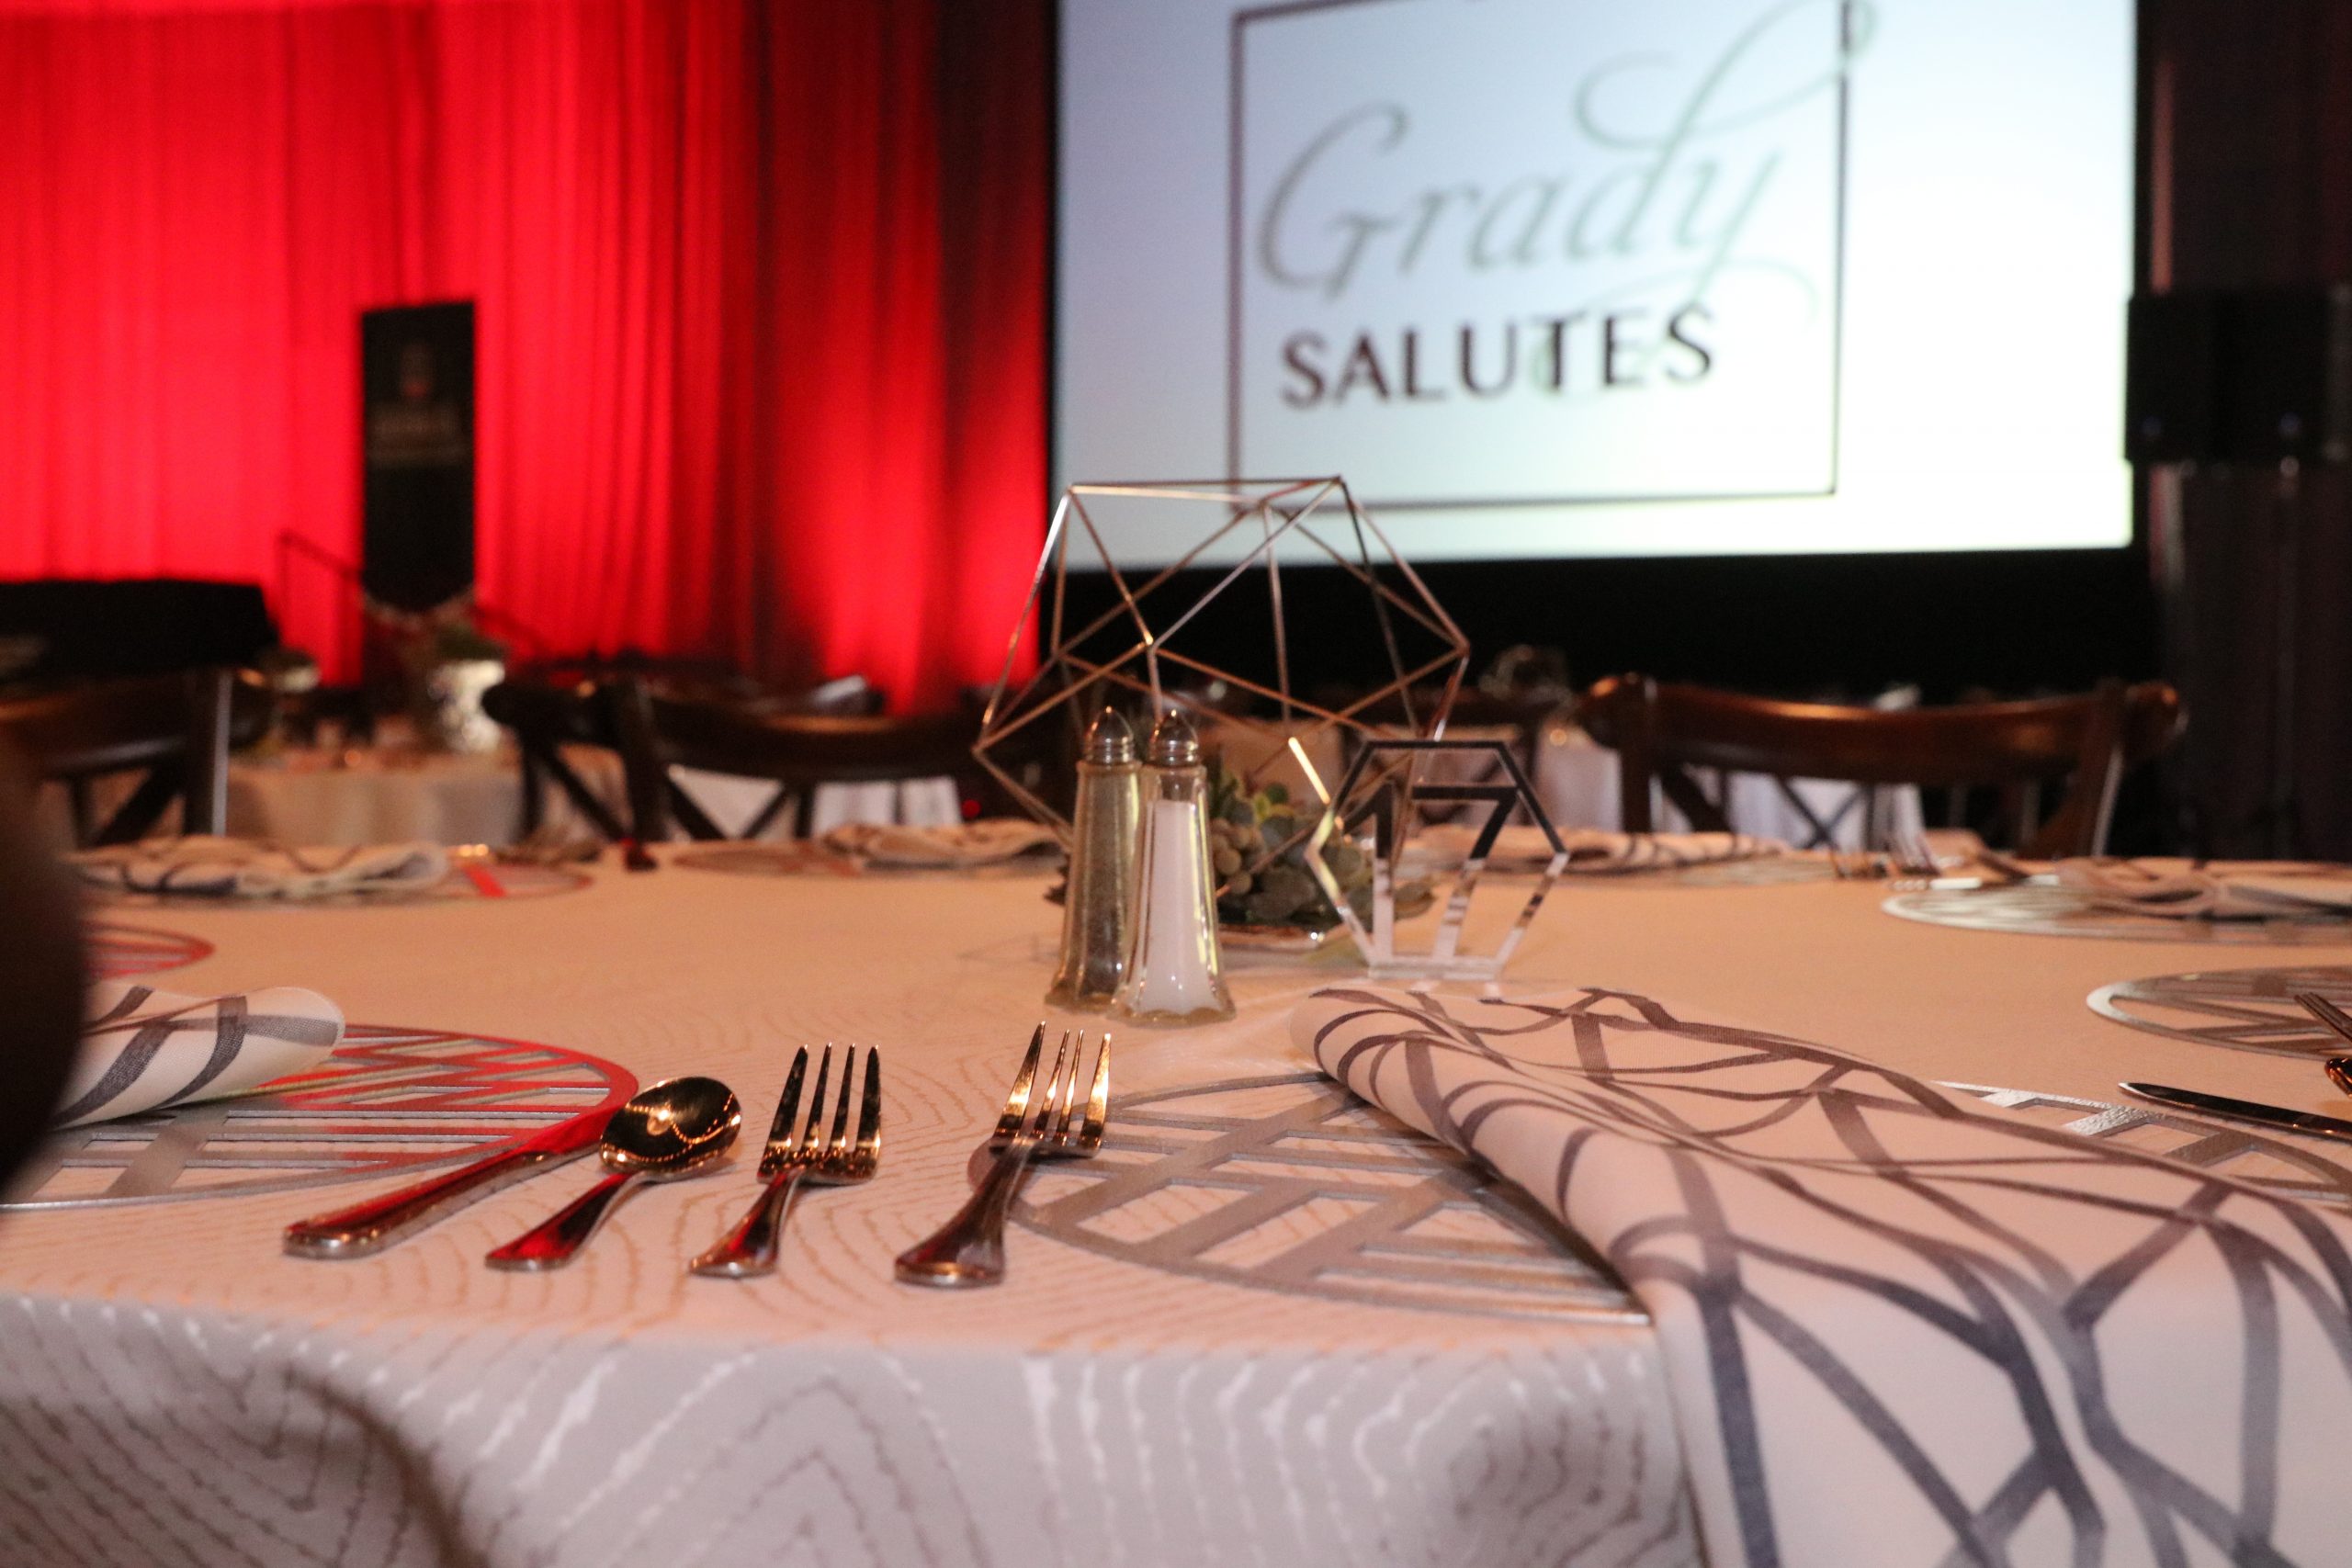 Place settings on a table at the 2019 Grady Salutes event.